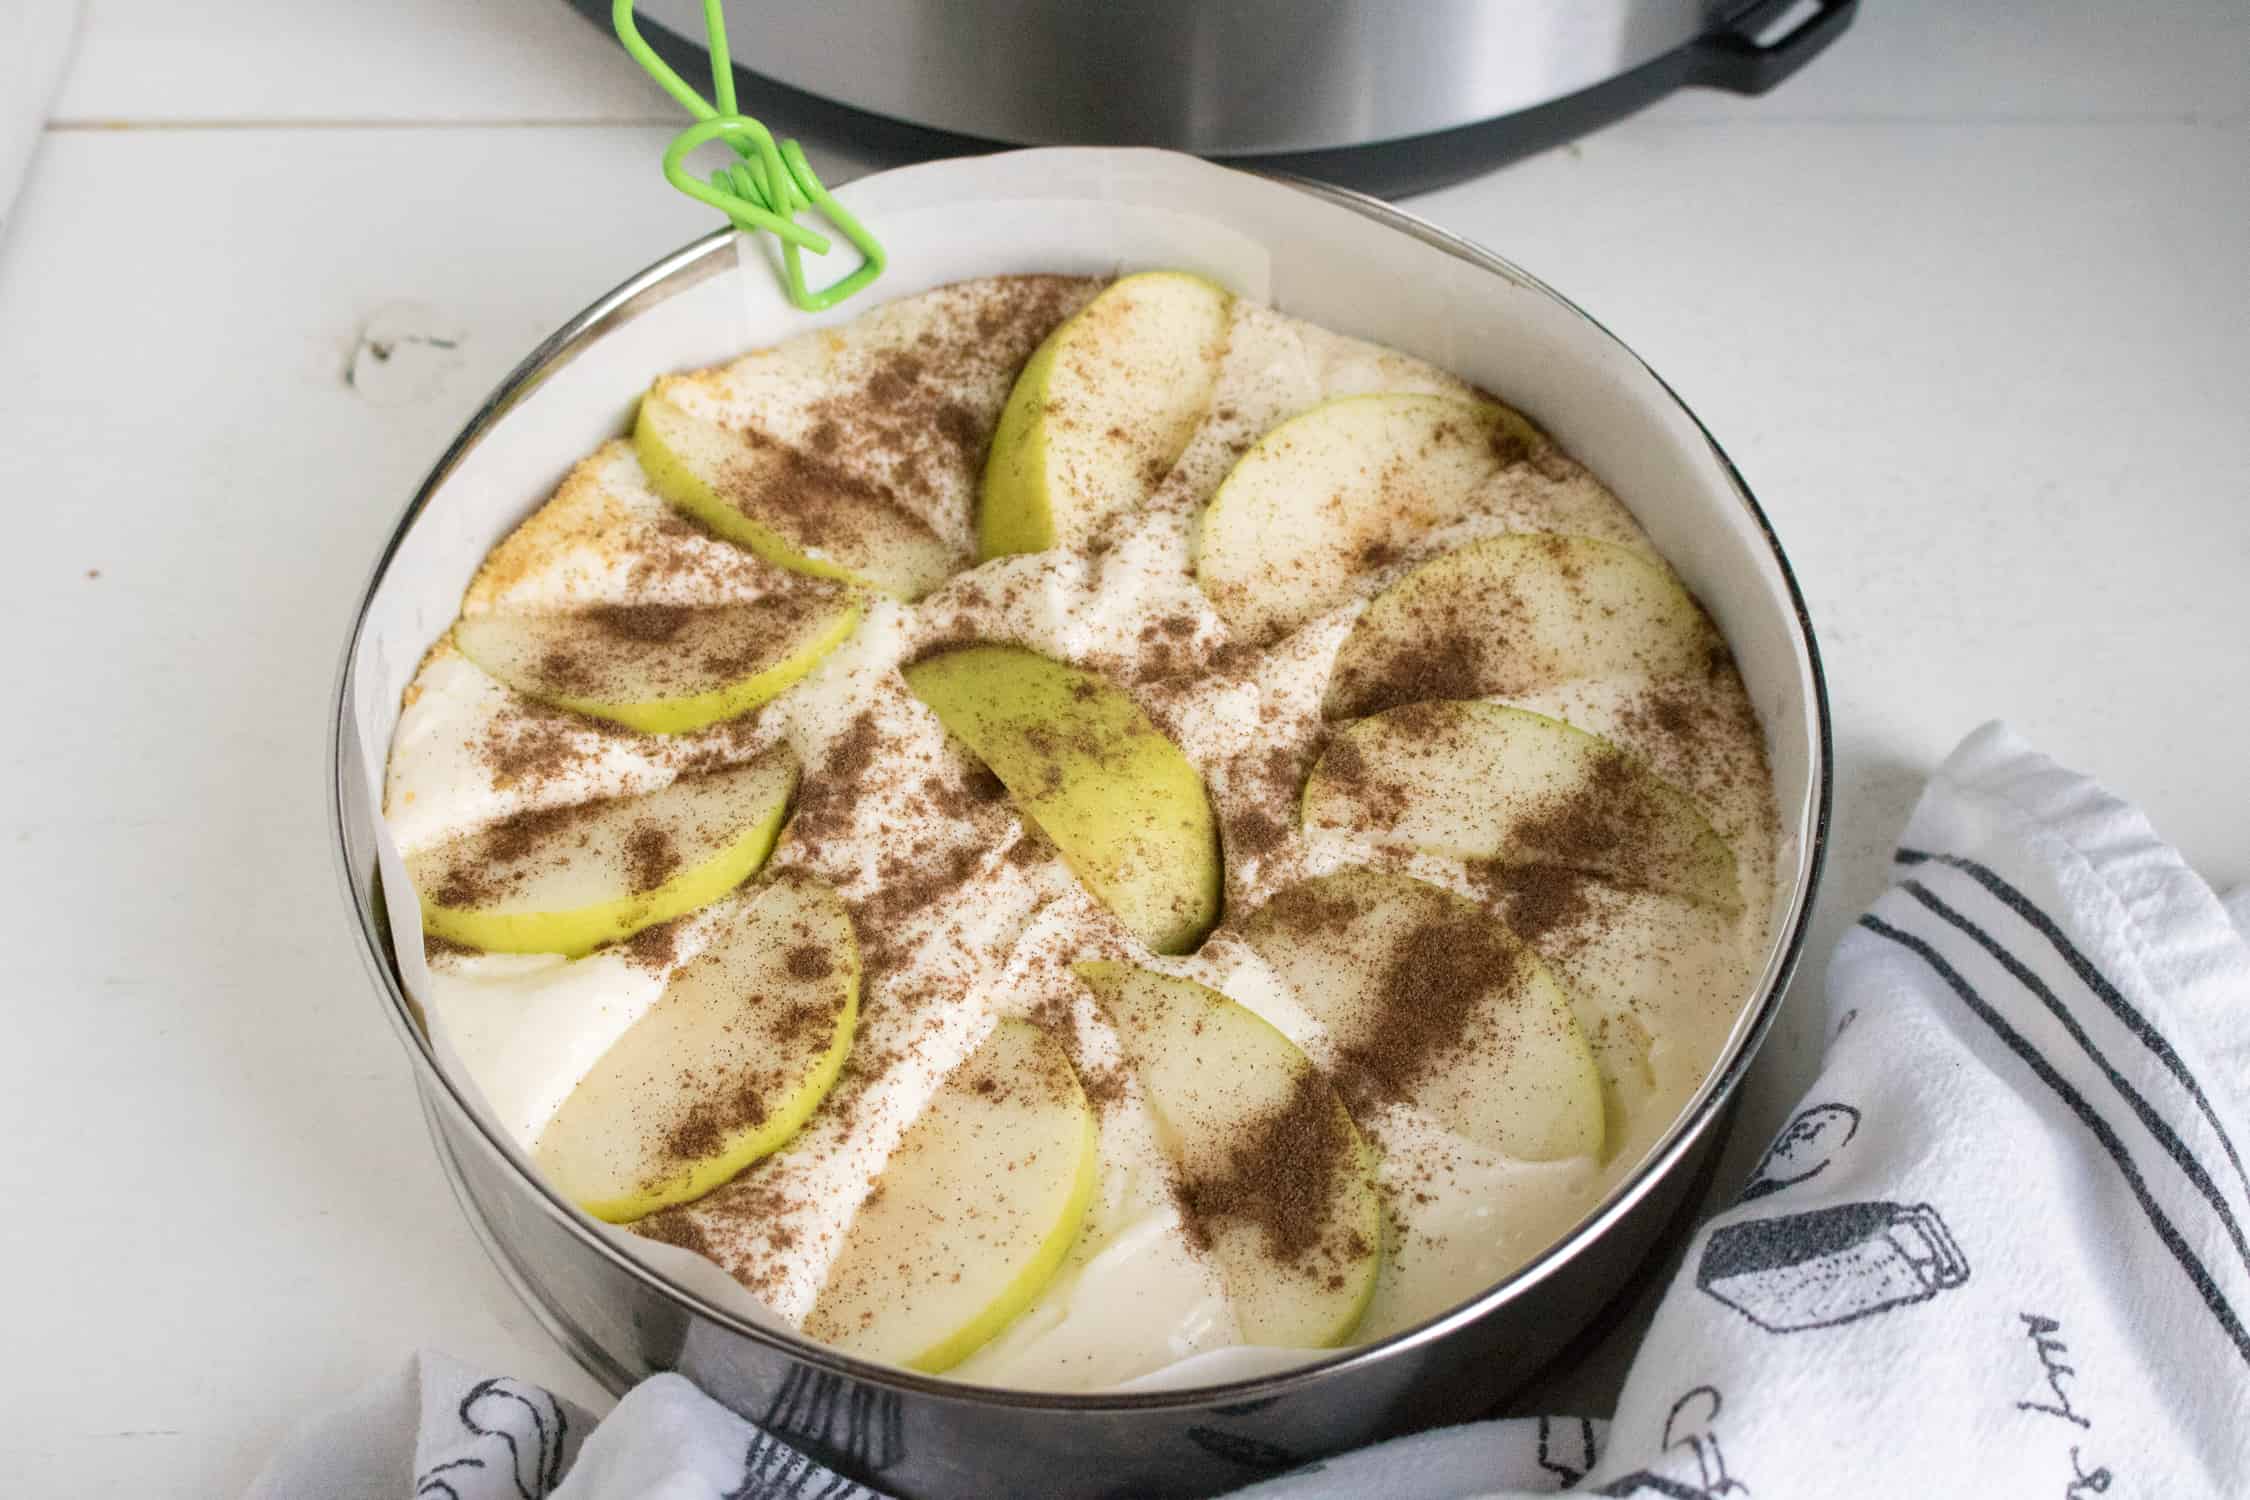  Instant Pot Apple Cheesecake in instant pot spring form pan with sliced apples on top, instant pot in back and black and white dishtowel in front